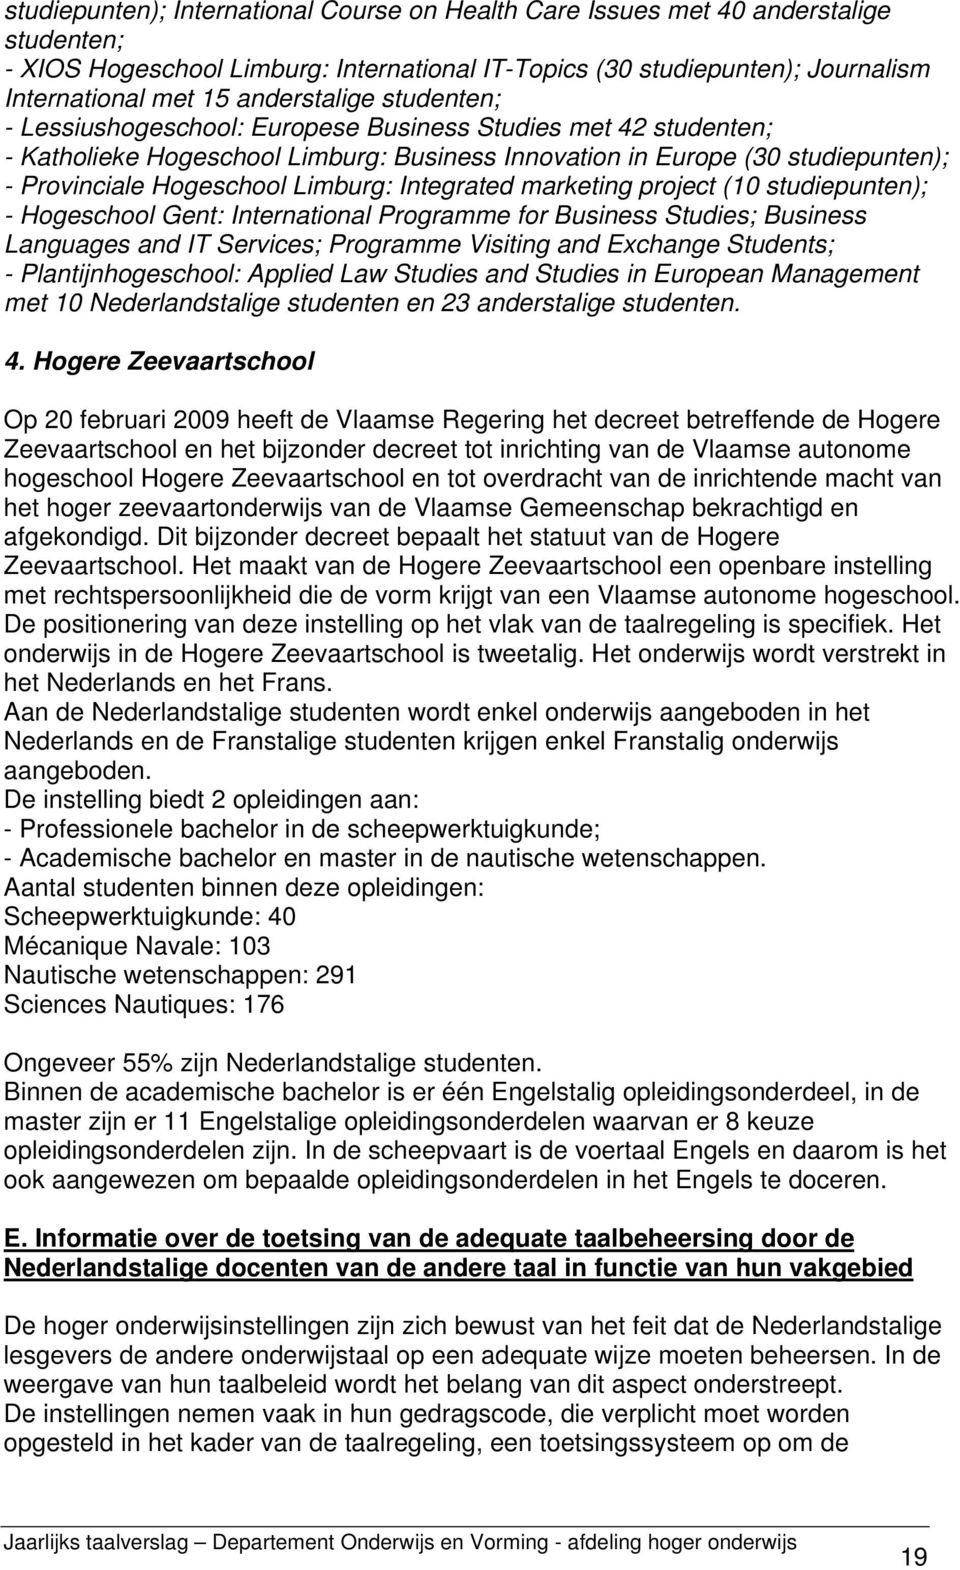 Limburg: Integrated marketing project (10 studiepunten); - Hogeschool Gent: International Programme for Business Studies; Business Languages and IT Services; Programme Visiting and Exchange Students;